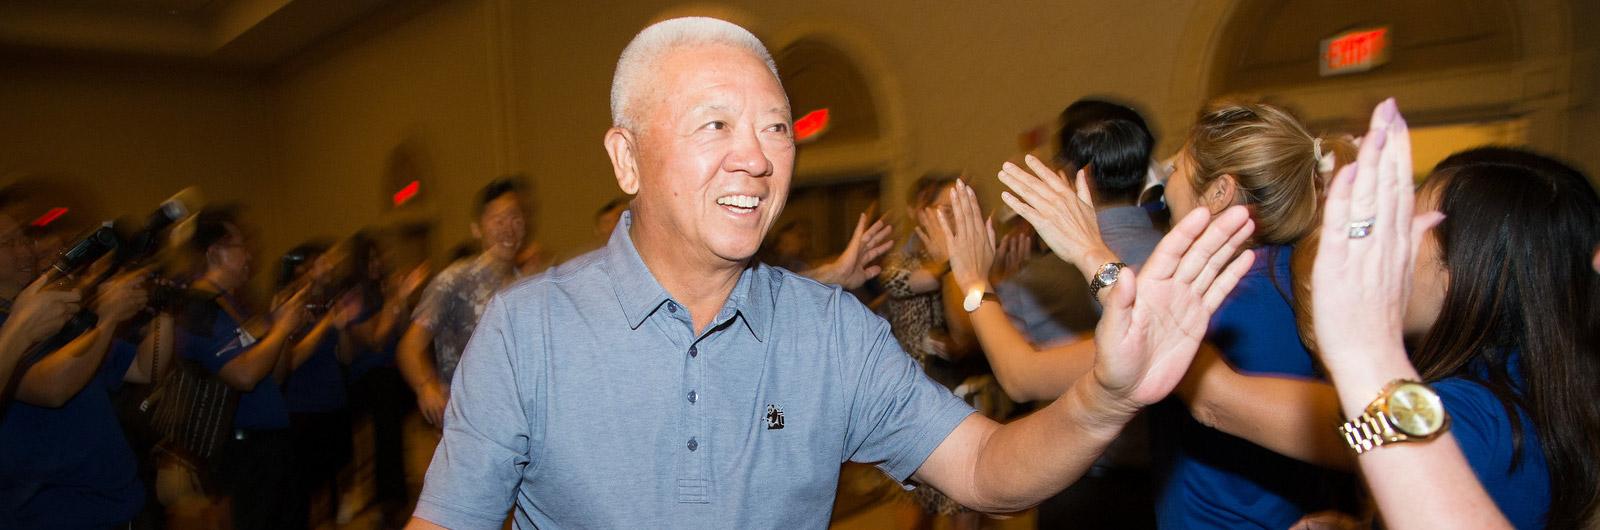 Andrew Cherng high five